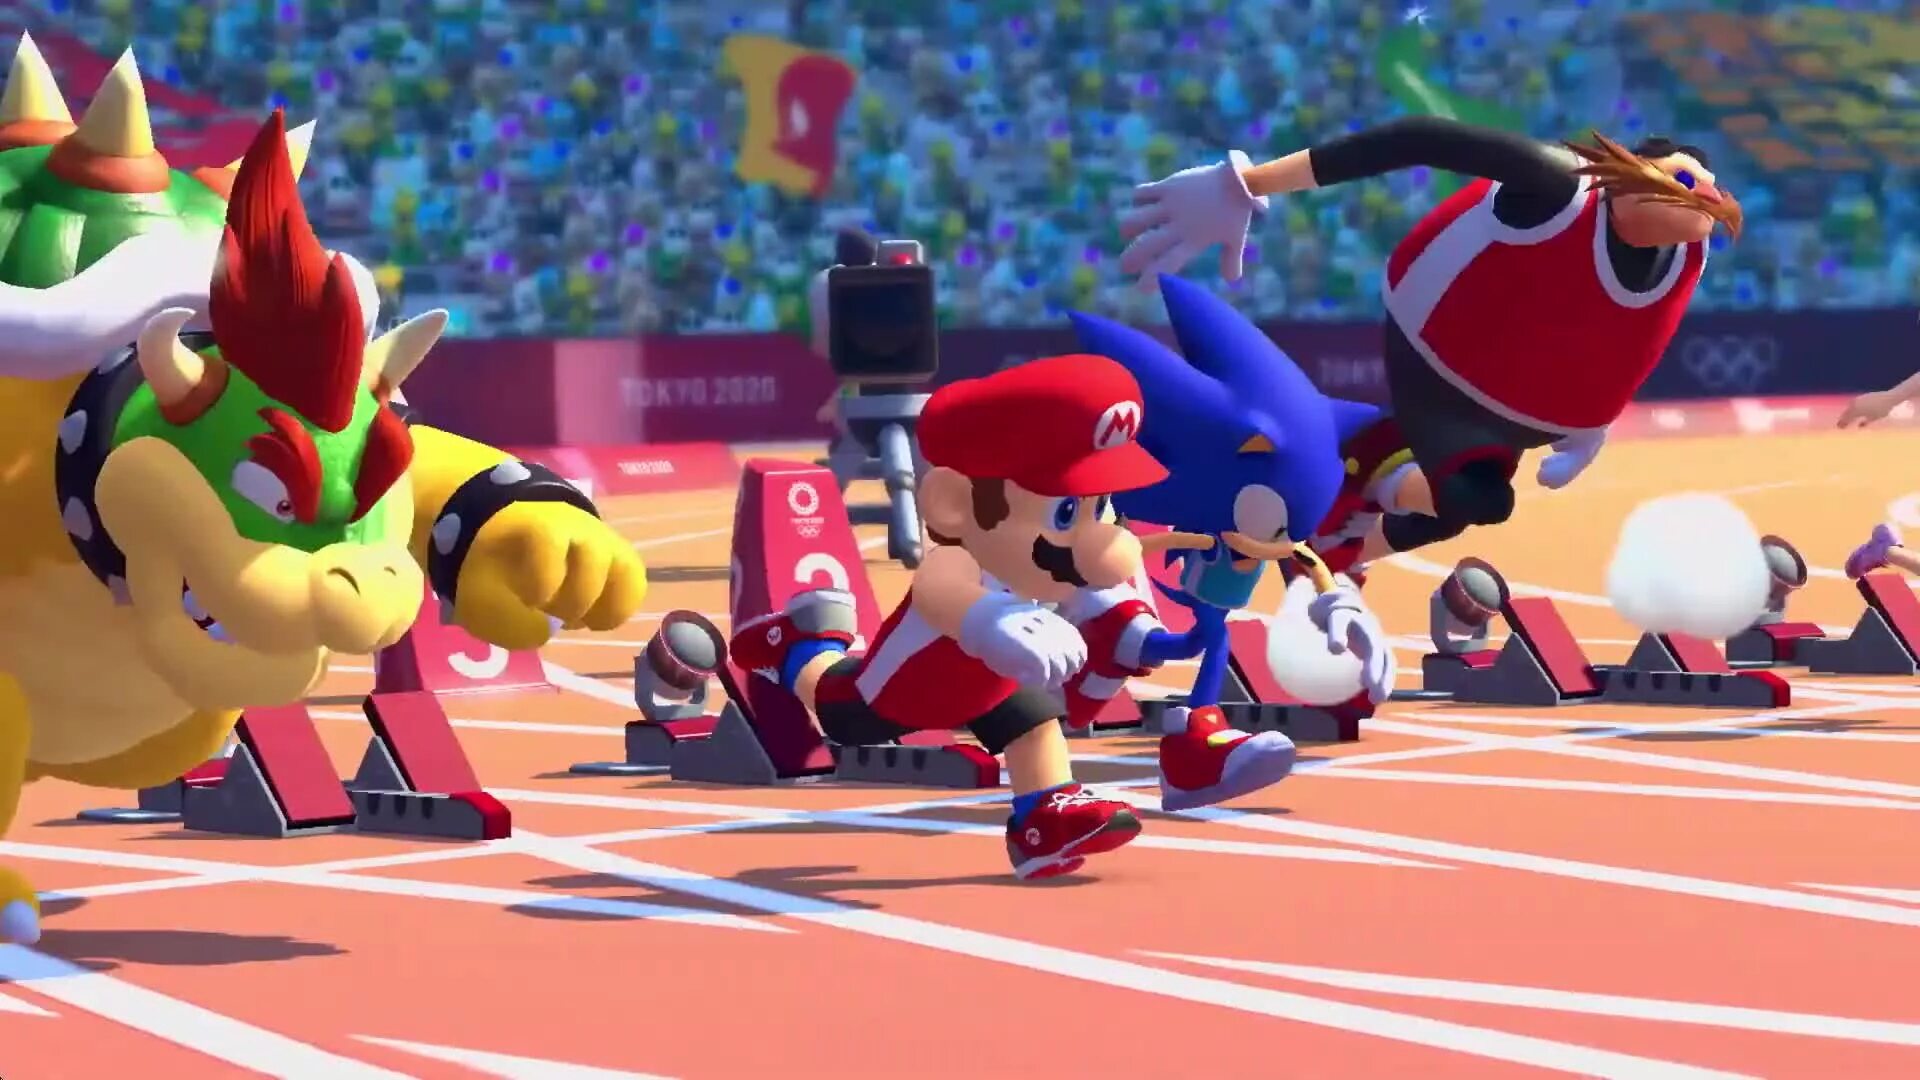 Mario and Sonic at the Olympic games Tokyo 2020. Марио и Соник на Олимпийских играх 2020. Марио и Соник на Олимпийских играх Nintendo Switch. Nintendo Switch Соник. Олимпийский марио и соник